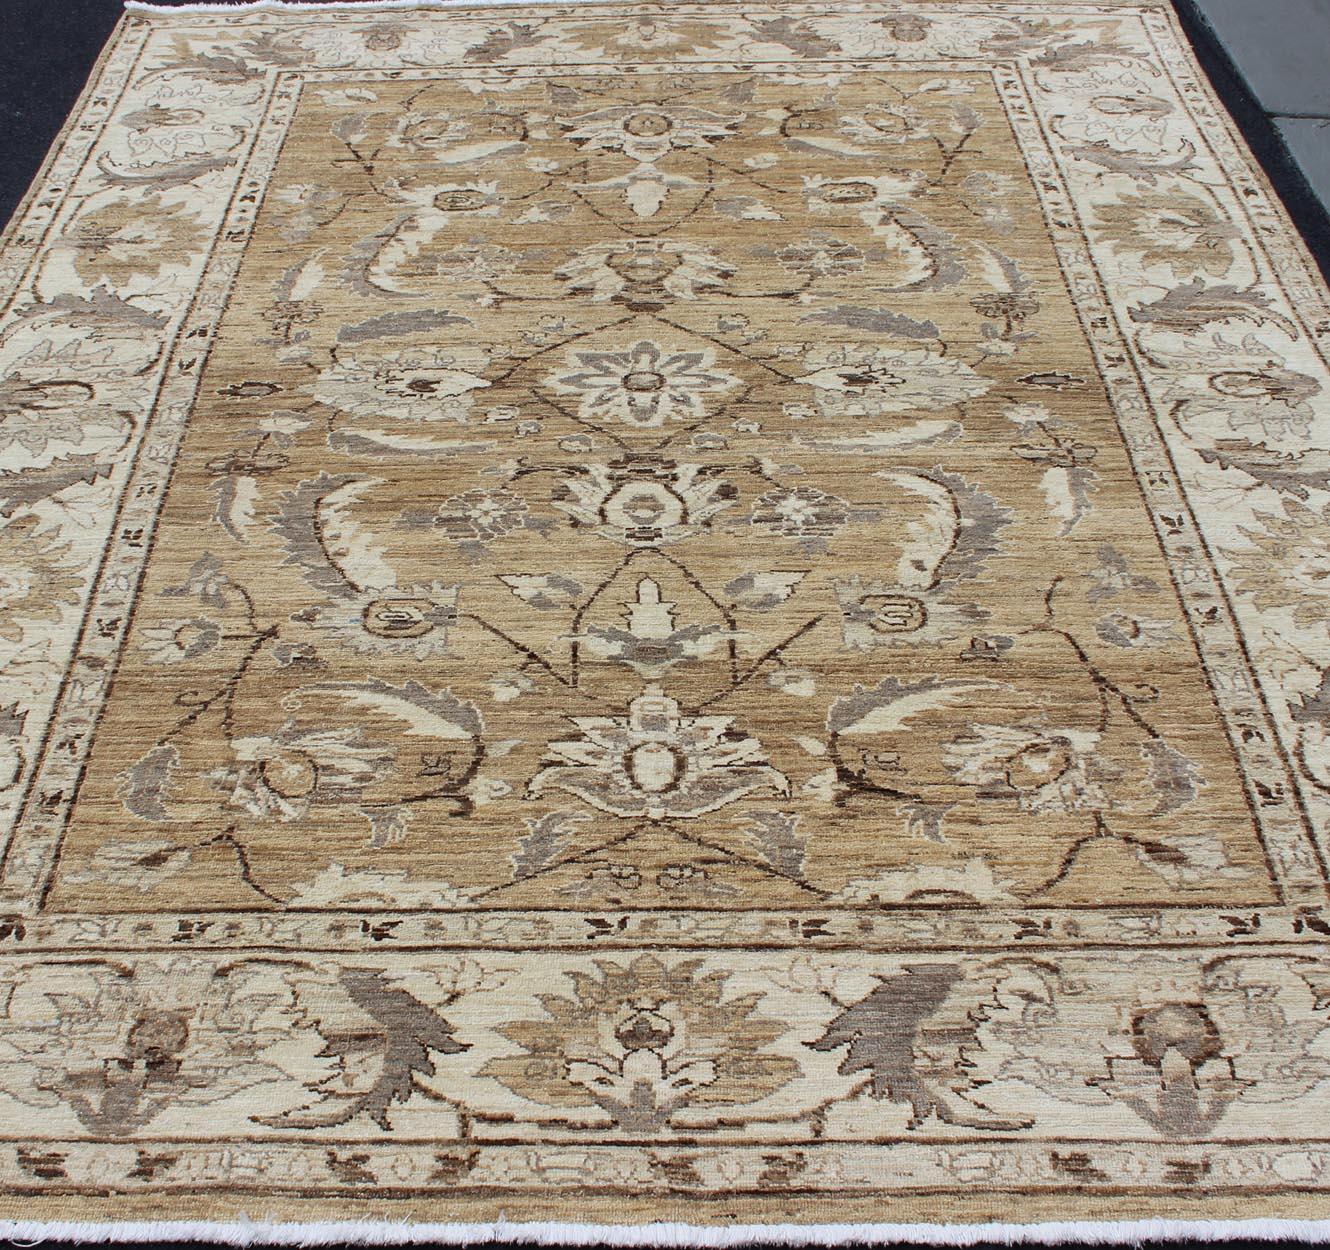 20th Century Modern Afghan Floral Pattern in Earth Tones with Browns and Cream For Sale